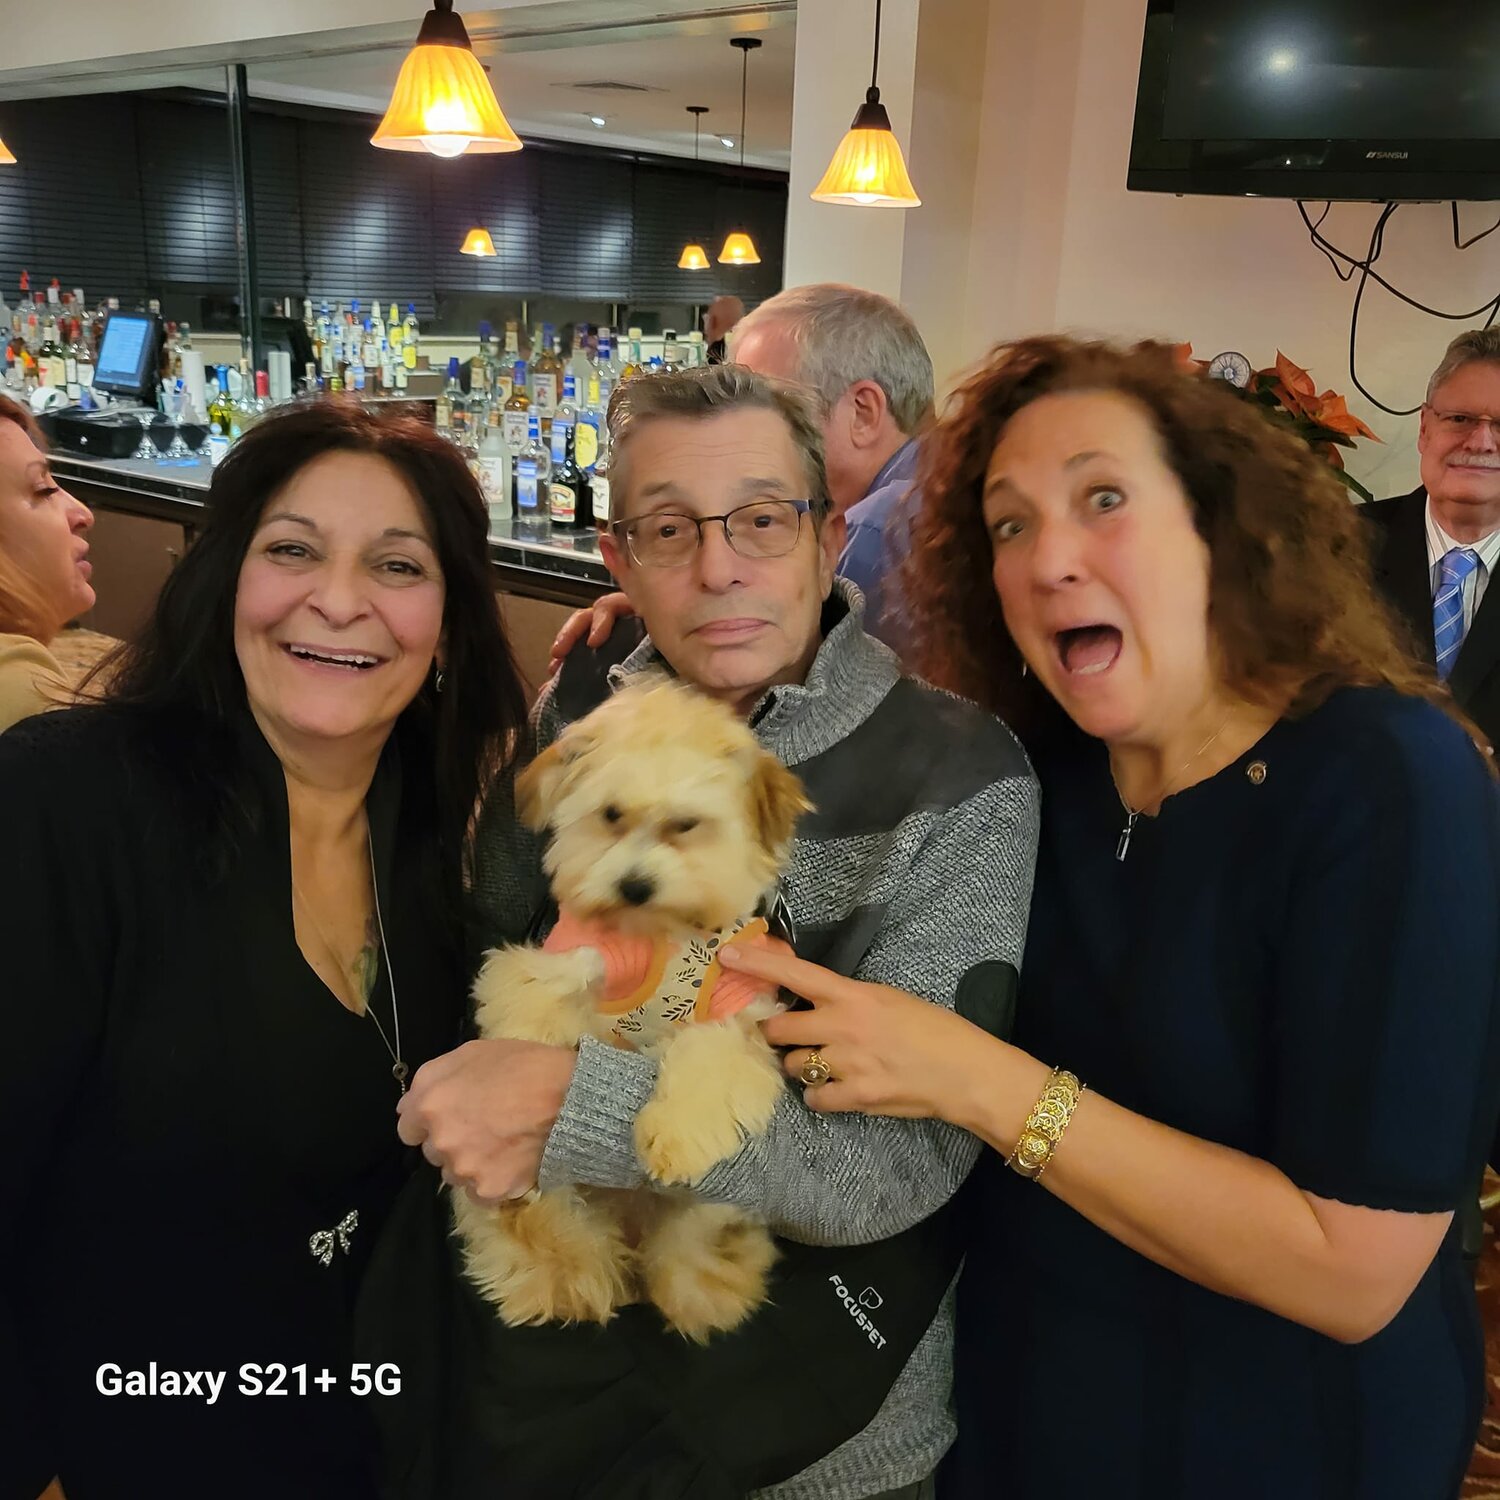 I was still working on "light up your face with gladness" while posing with Jackie D'Abbraccio, left, and Lori Rae Silvers as they admired That Blur Named Gidget at the SCCC Awards Gala last Thursday.